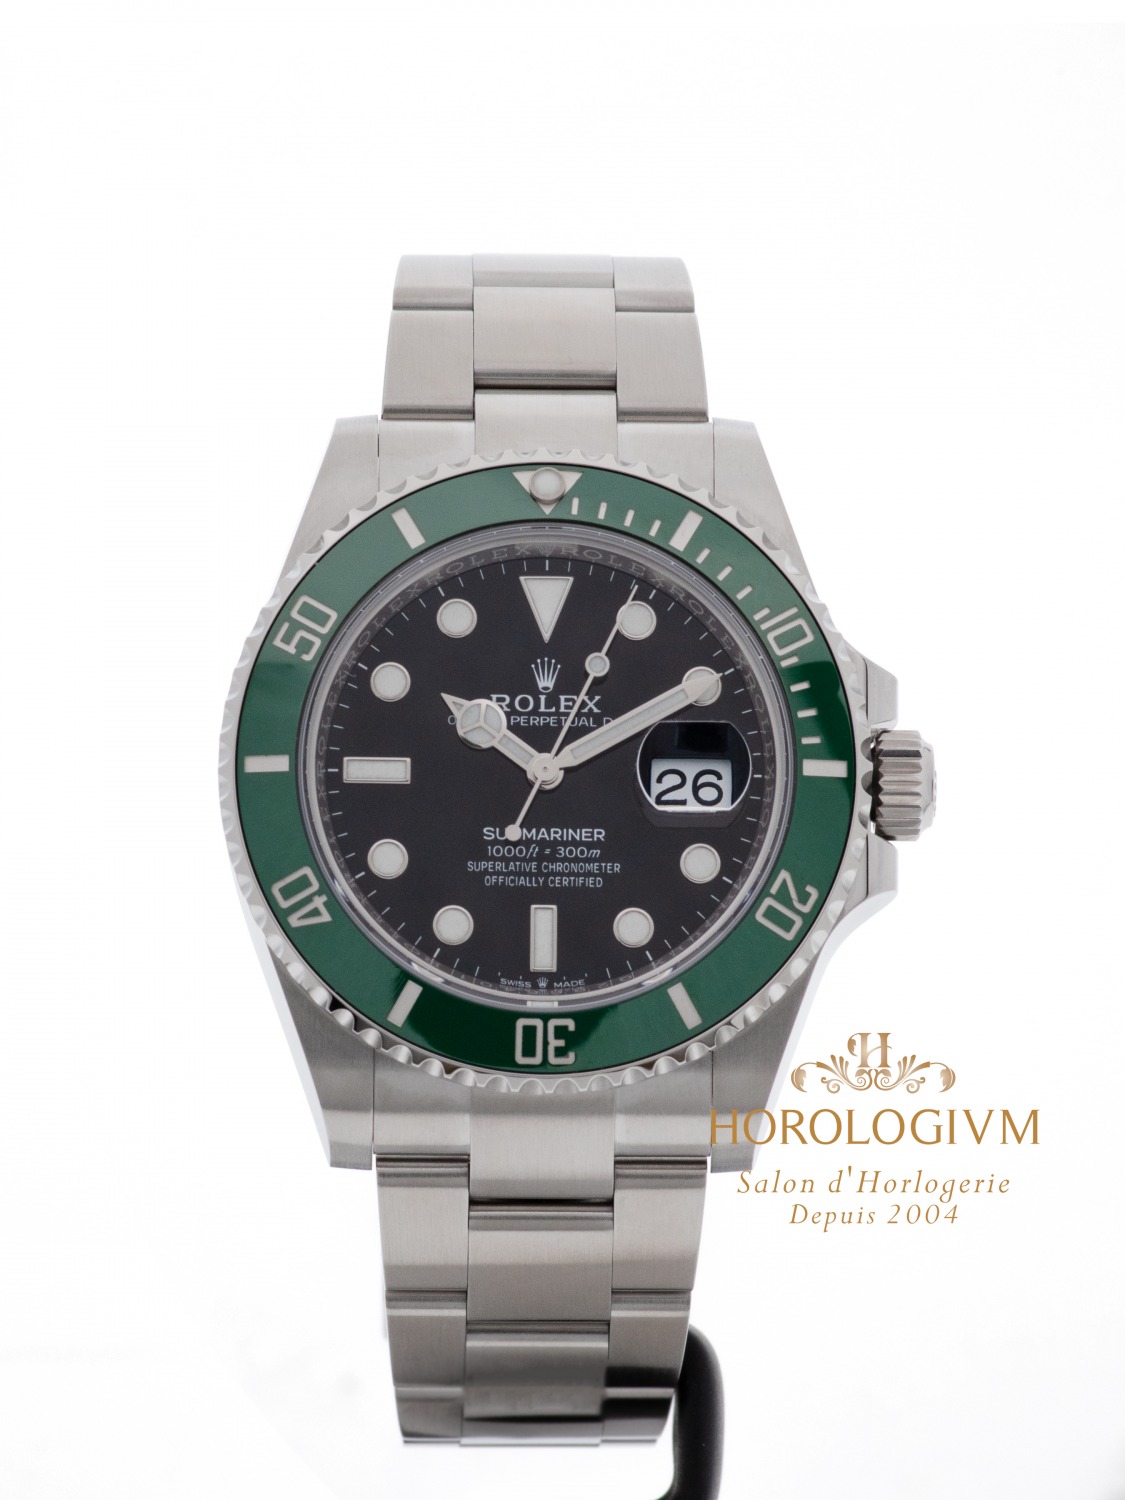 Rolex Oyster Perpetual Date Submariner 41MM Ref. 126610LV watch, silver (case) and silver & green cerachrom / ceramic (bezel)